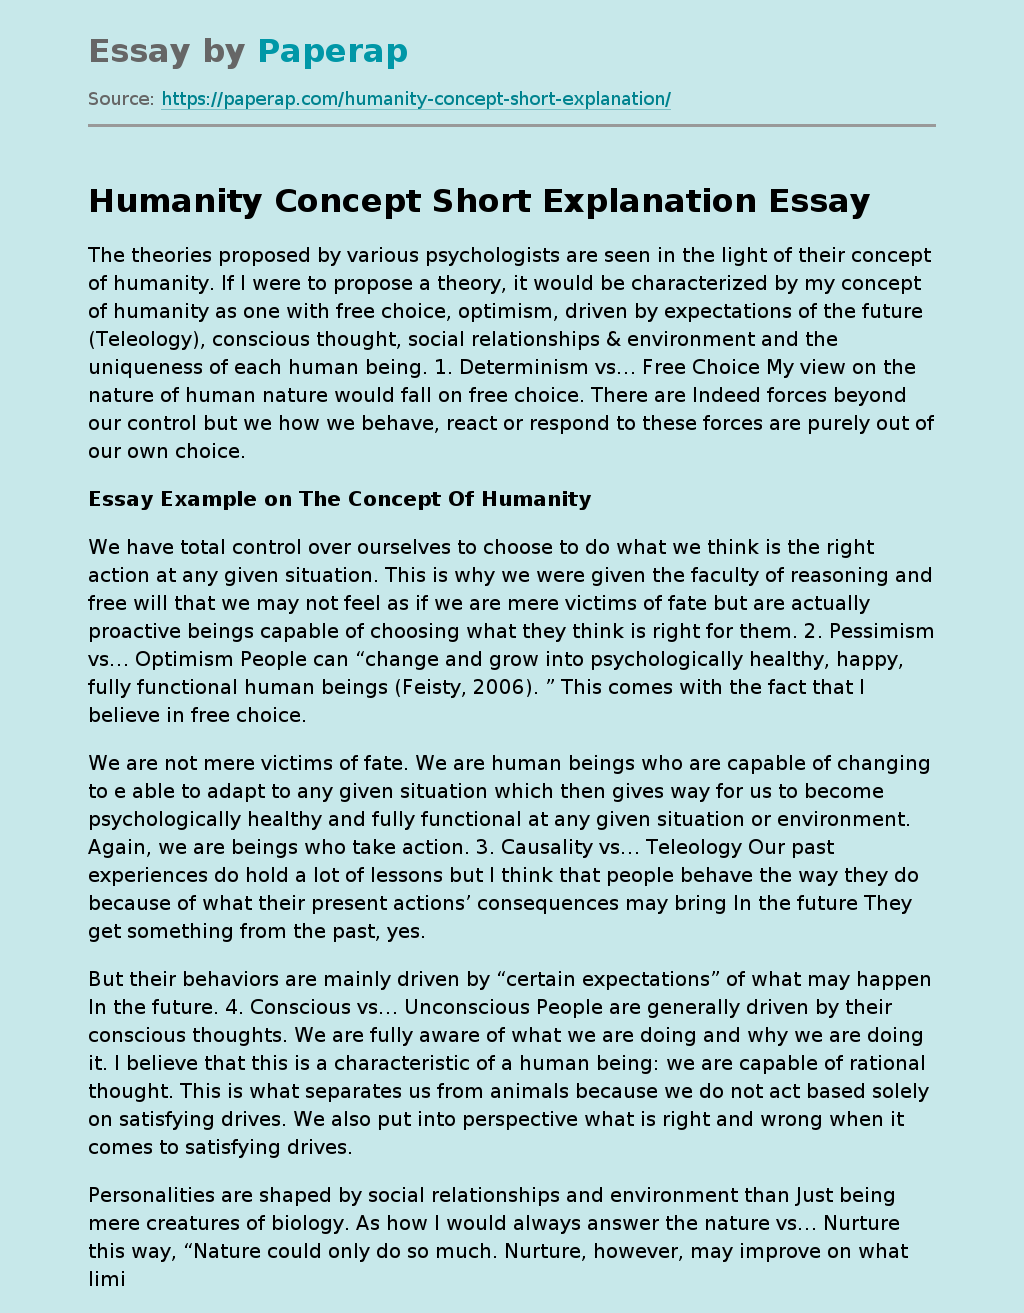 the future of humanity essay